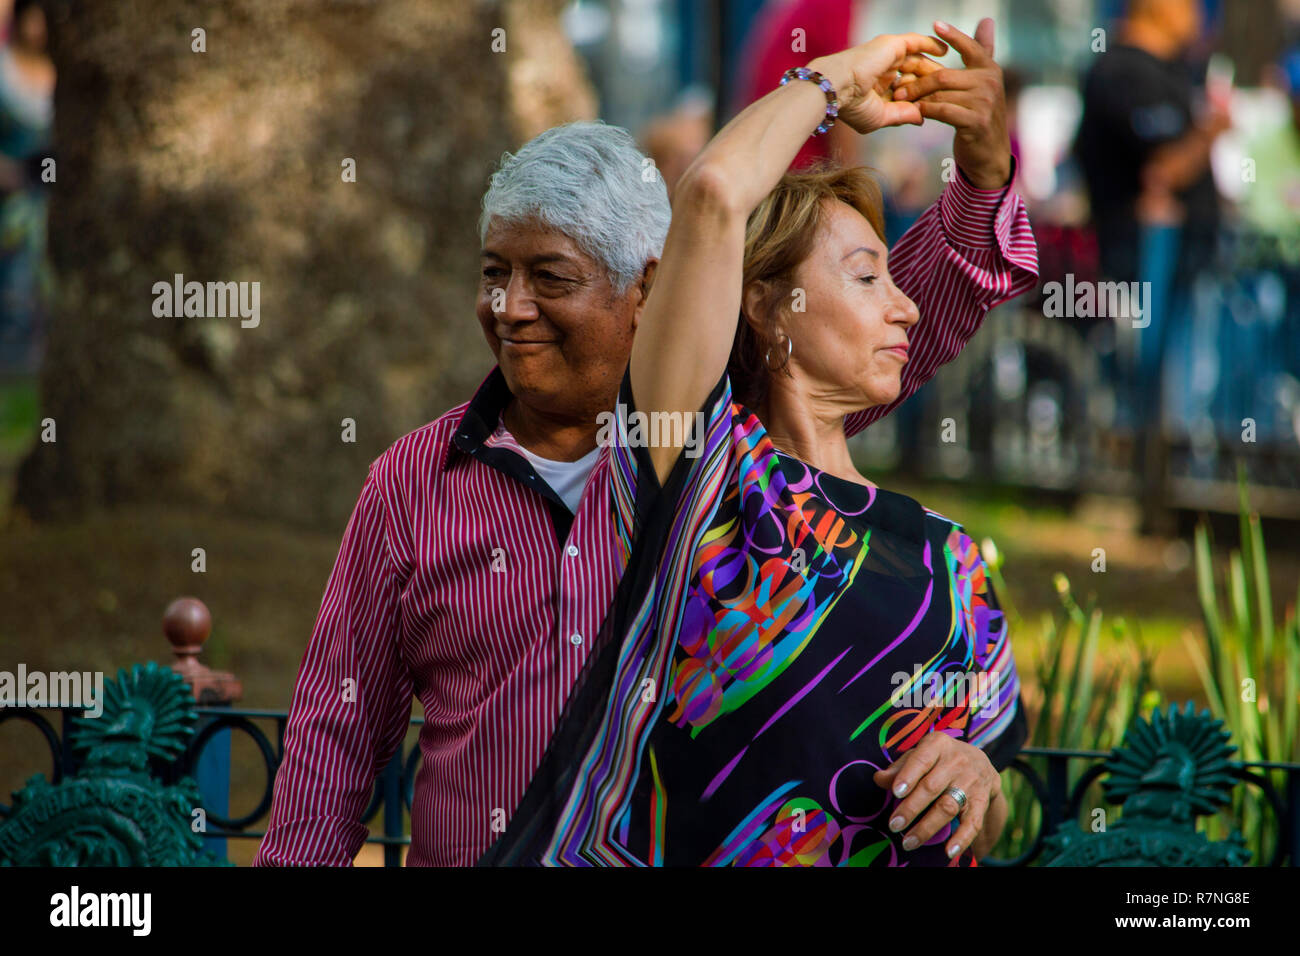 A couple salsa dancing in Alameda Park in Mexico City, Mexico Stock Photo